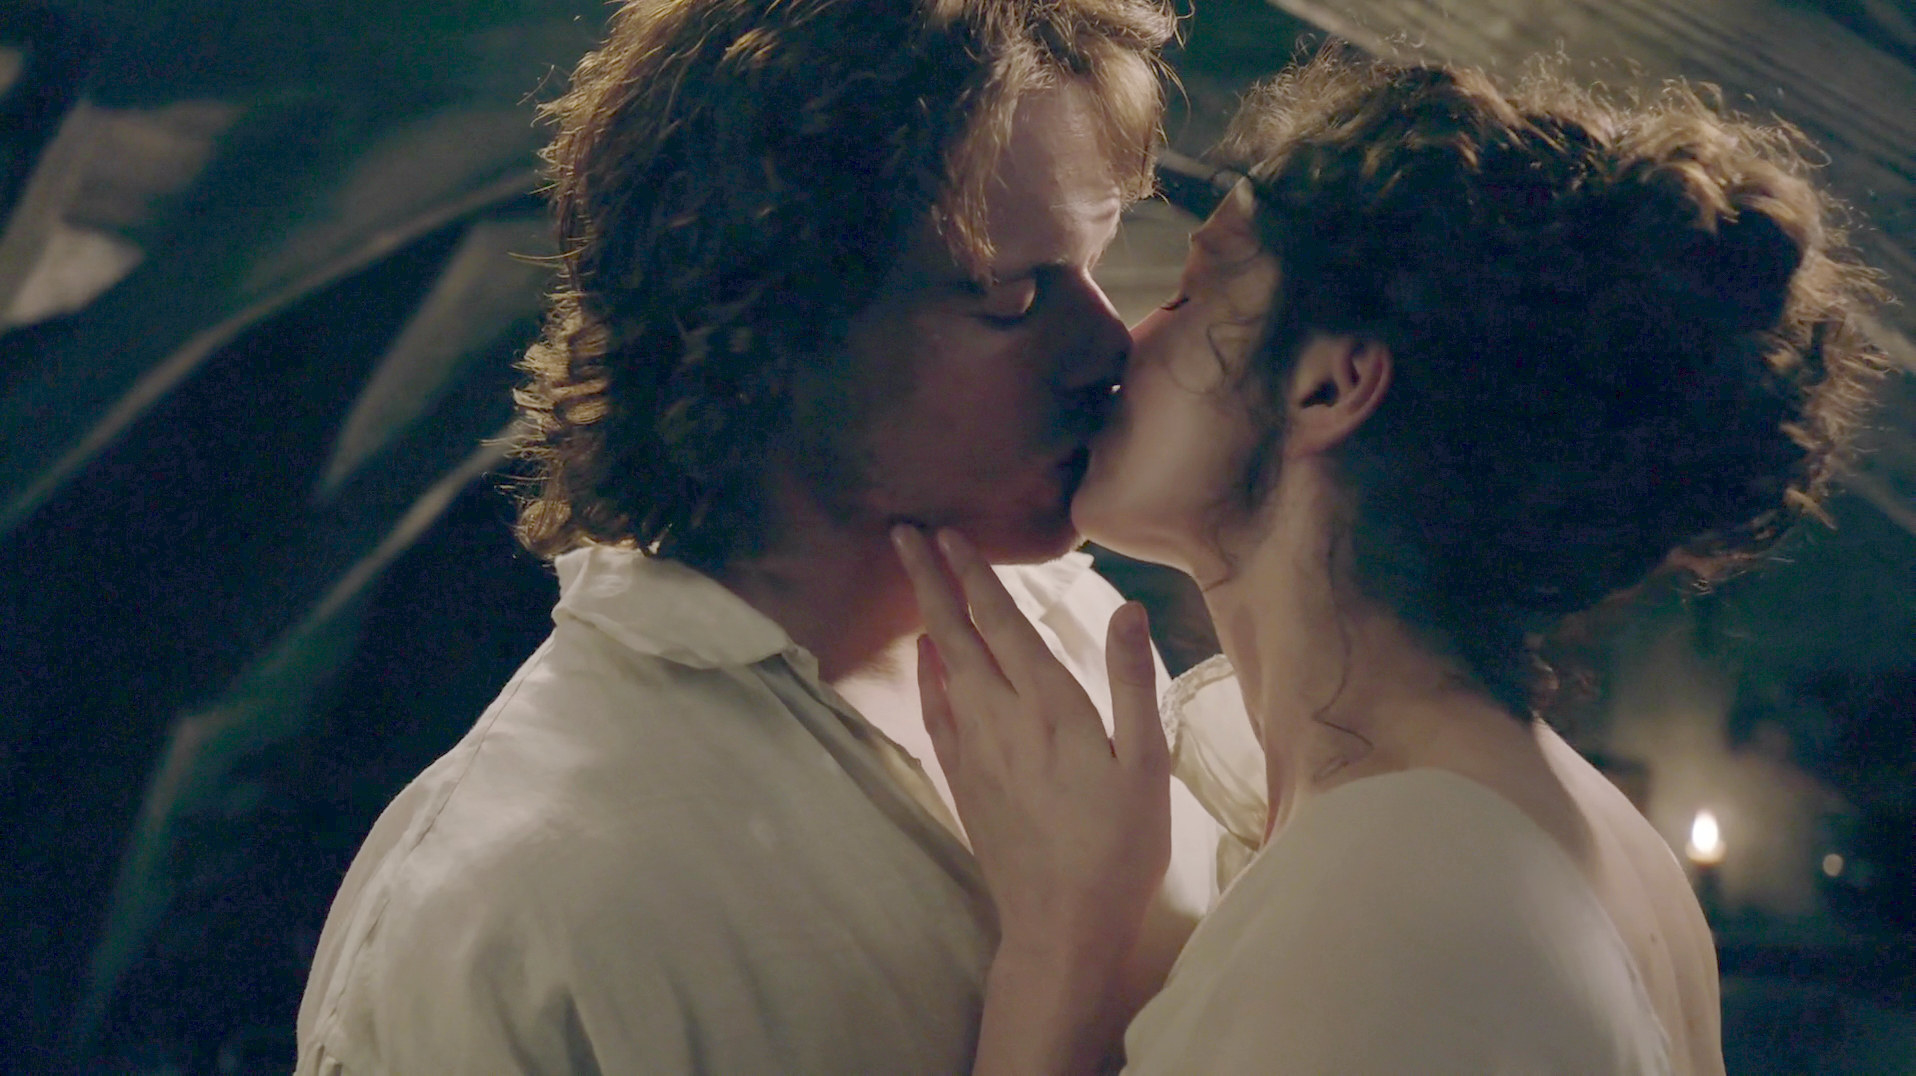 Jamie and Claire's wedding night was one of the steamiest scenes in te...